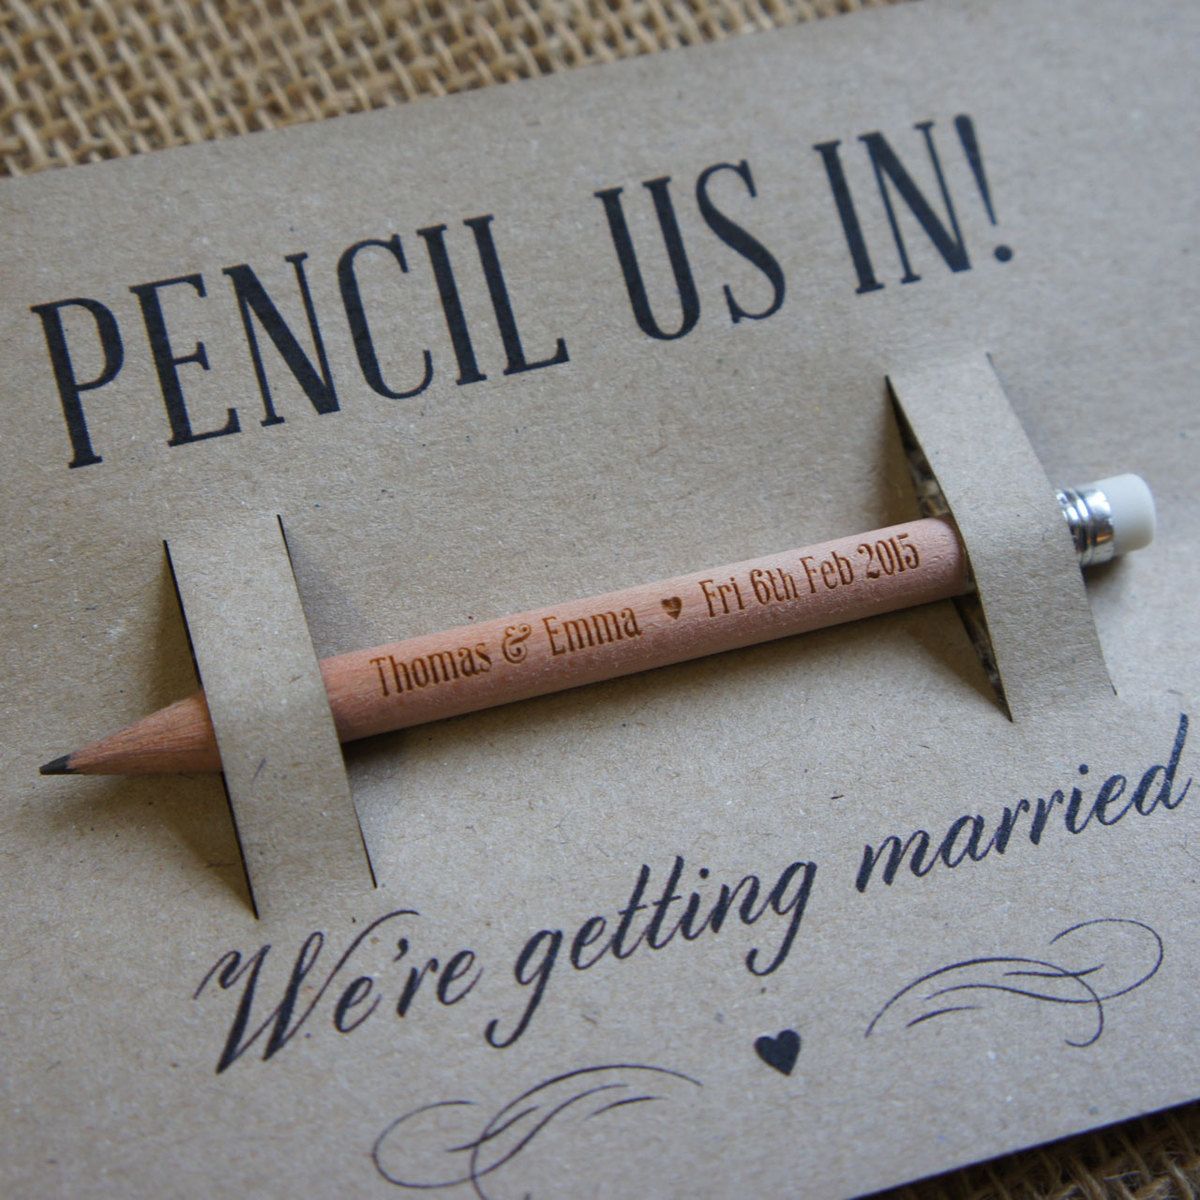 Pencil Us In – Save the Date Personalised Pencils